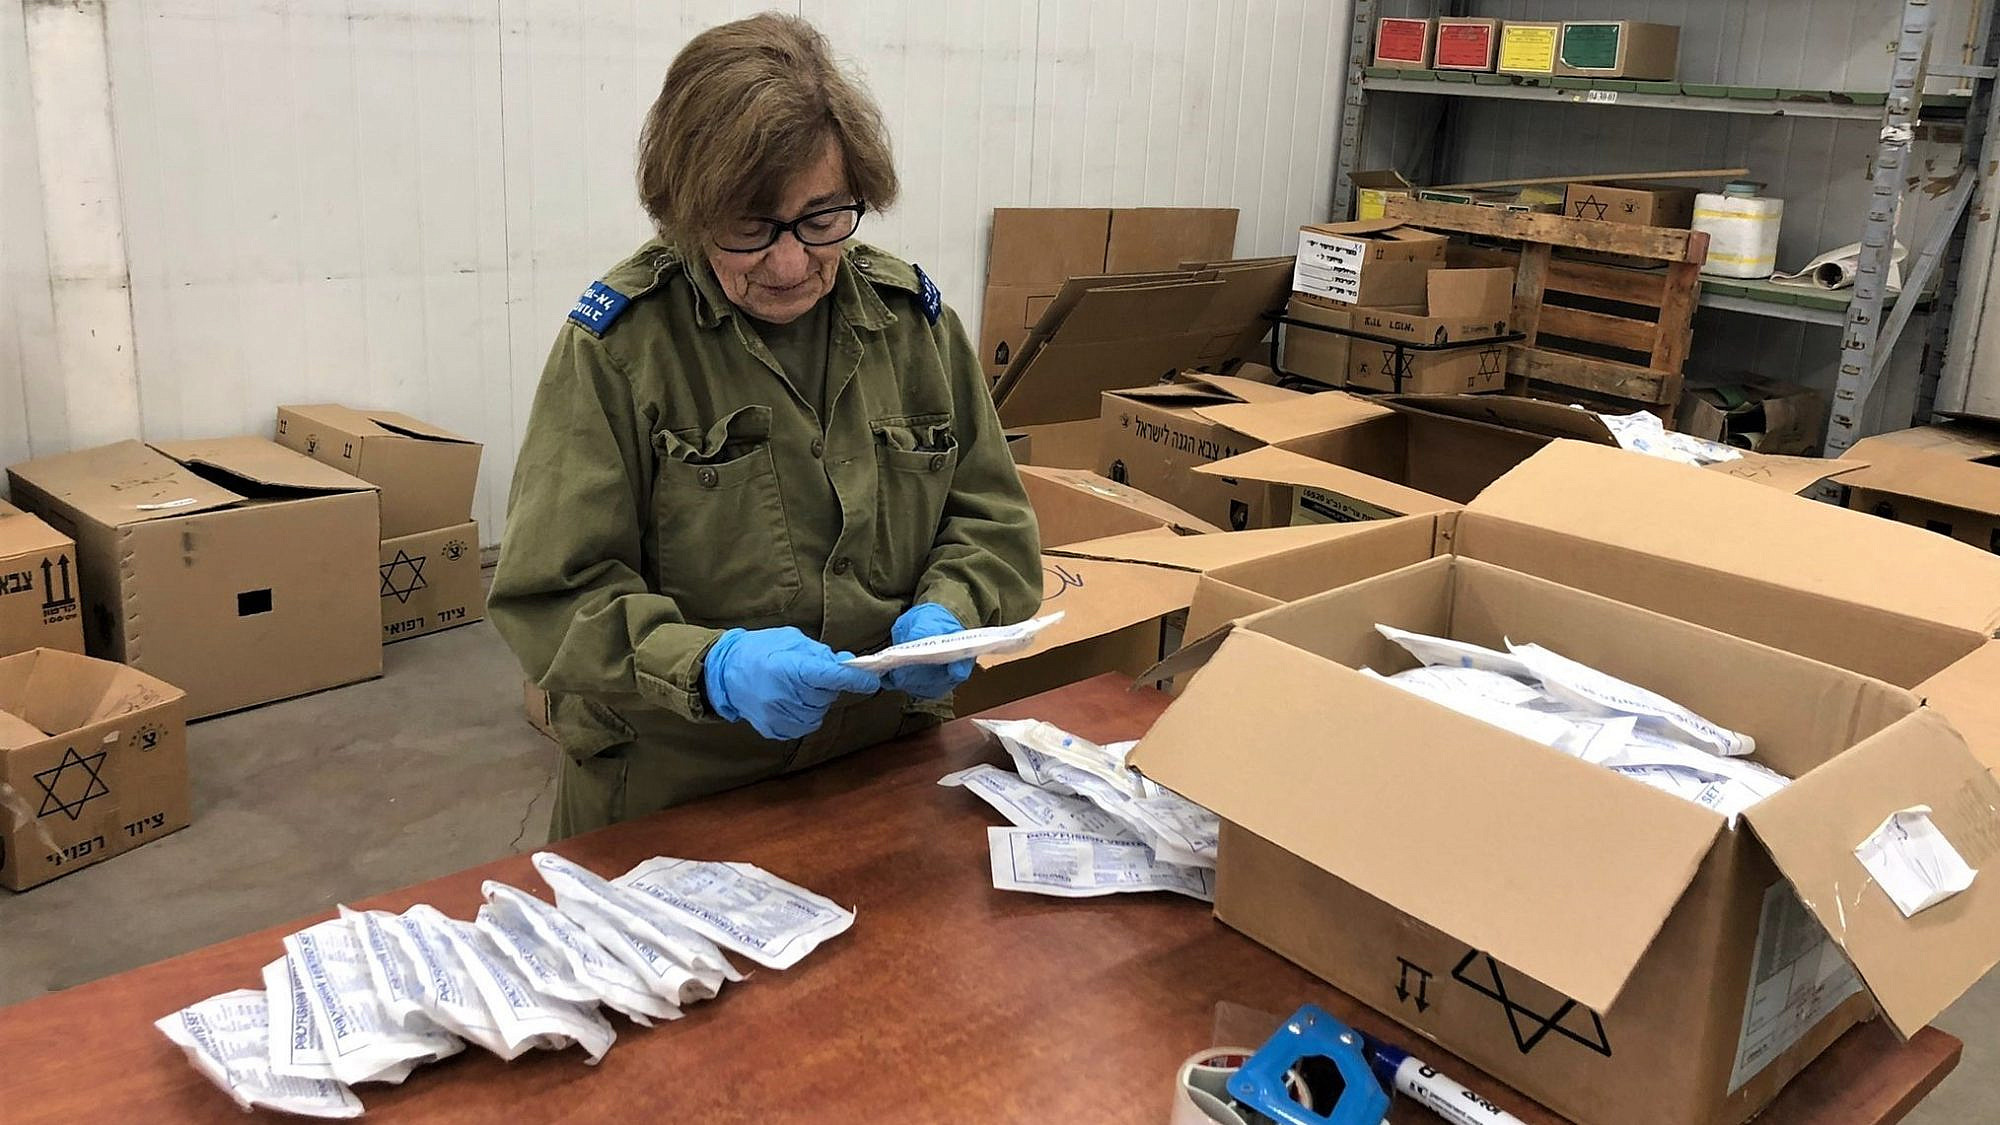 Camilla Maas of Rochester, N.Y., checks medical supplies on an Israel Defense Forces base as part of Sar-El, or the “Volunteers for Israel” program. Credit: Courtesy.